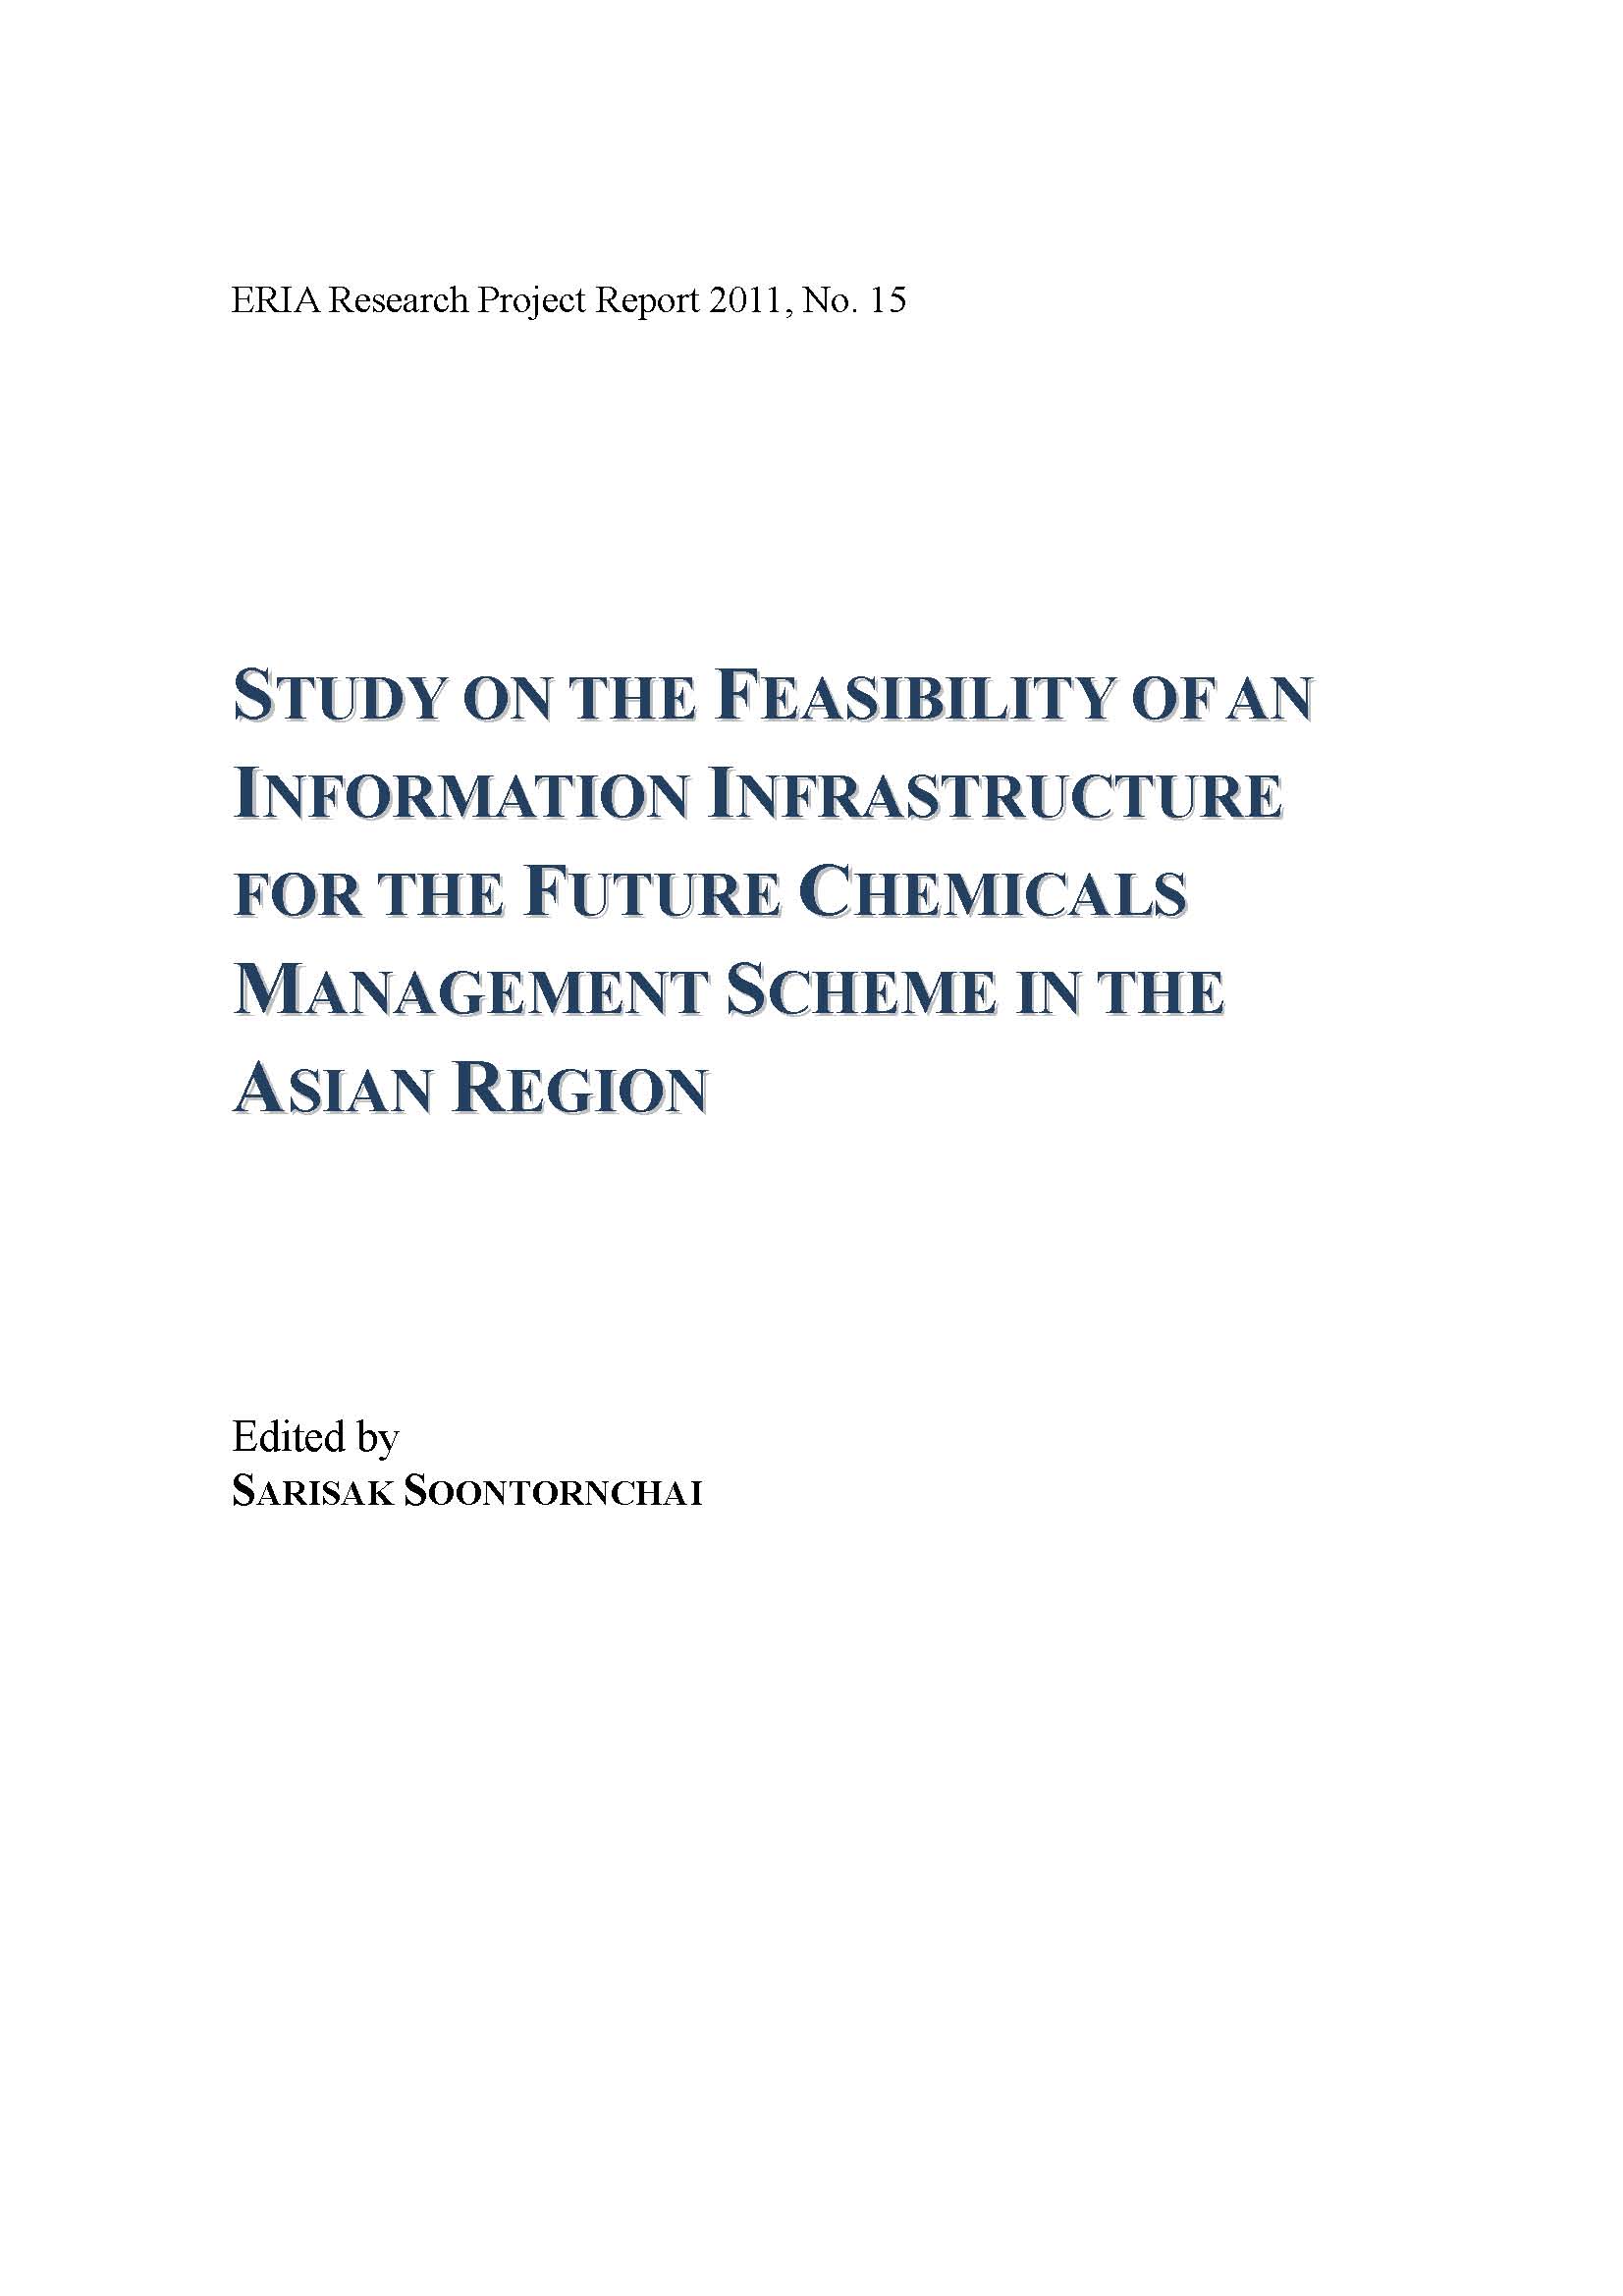 Study on the Feasibility of and Information Infrastructure for the Future Chemicals Management Scheme in the Asian Region